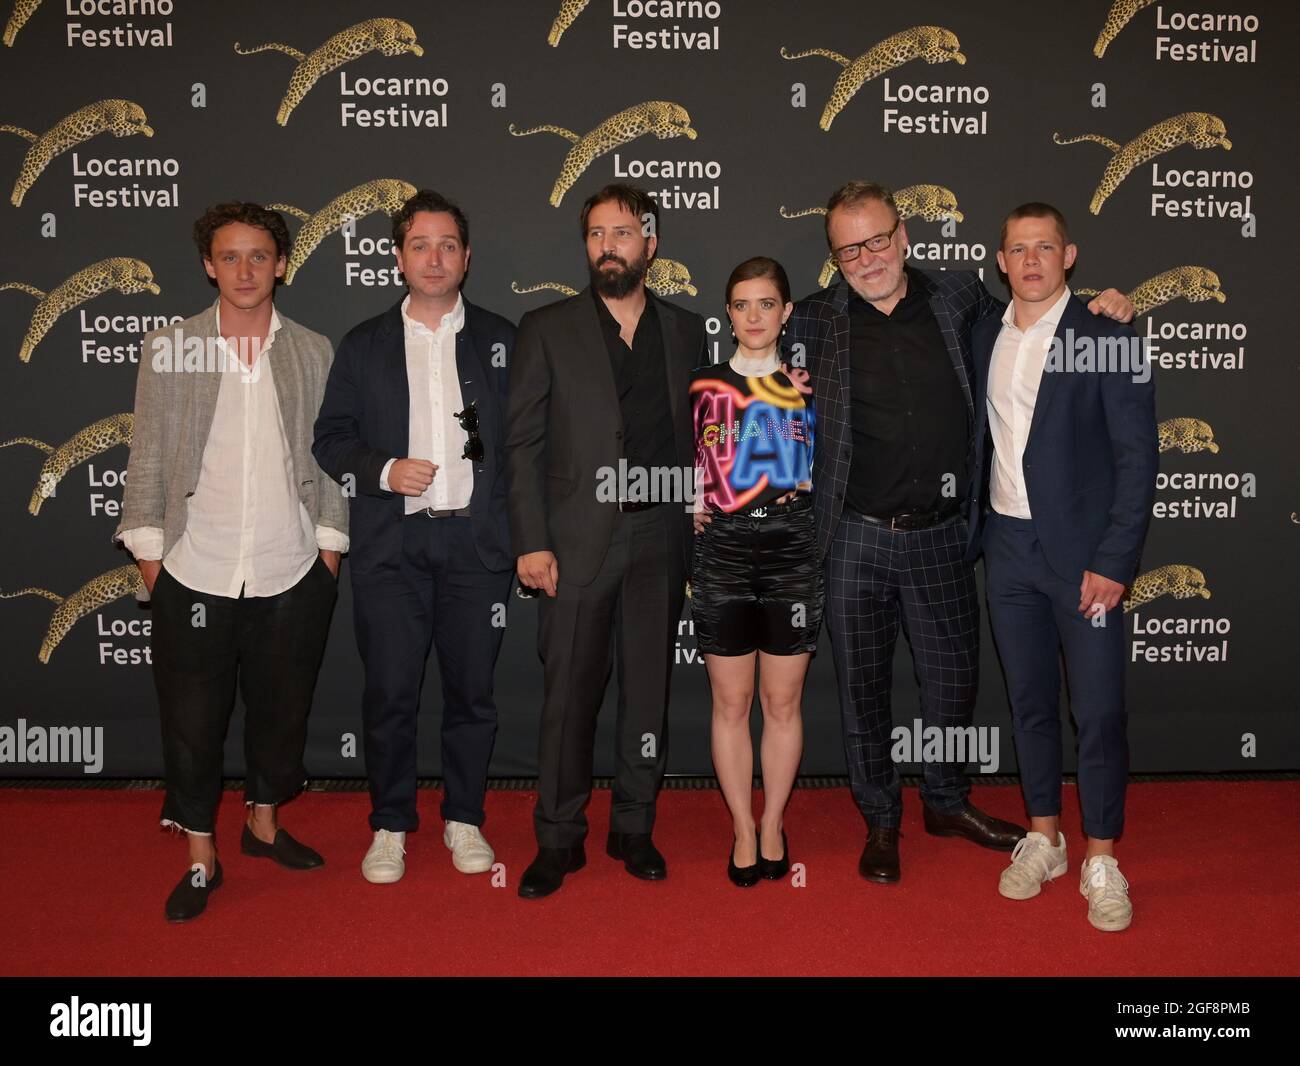 Locarno, Switzerland Locarno Film Festival 2021 Red carpet In the photo:  Stefan Ruzowitzky director, Murathan Muslu actor, Liv Lisa Fries actress  Stock Photo - Alamy